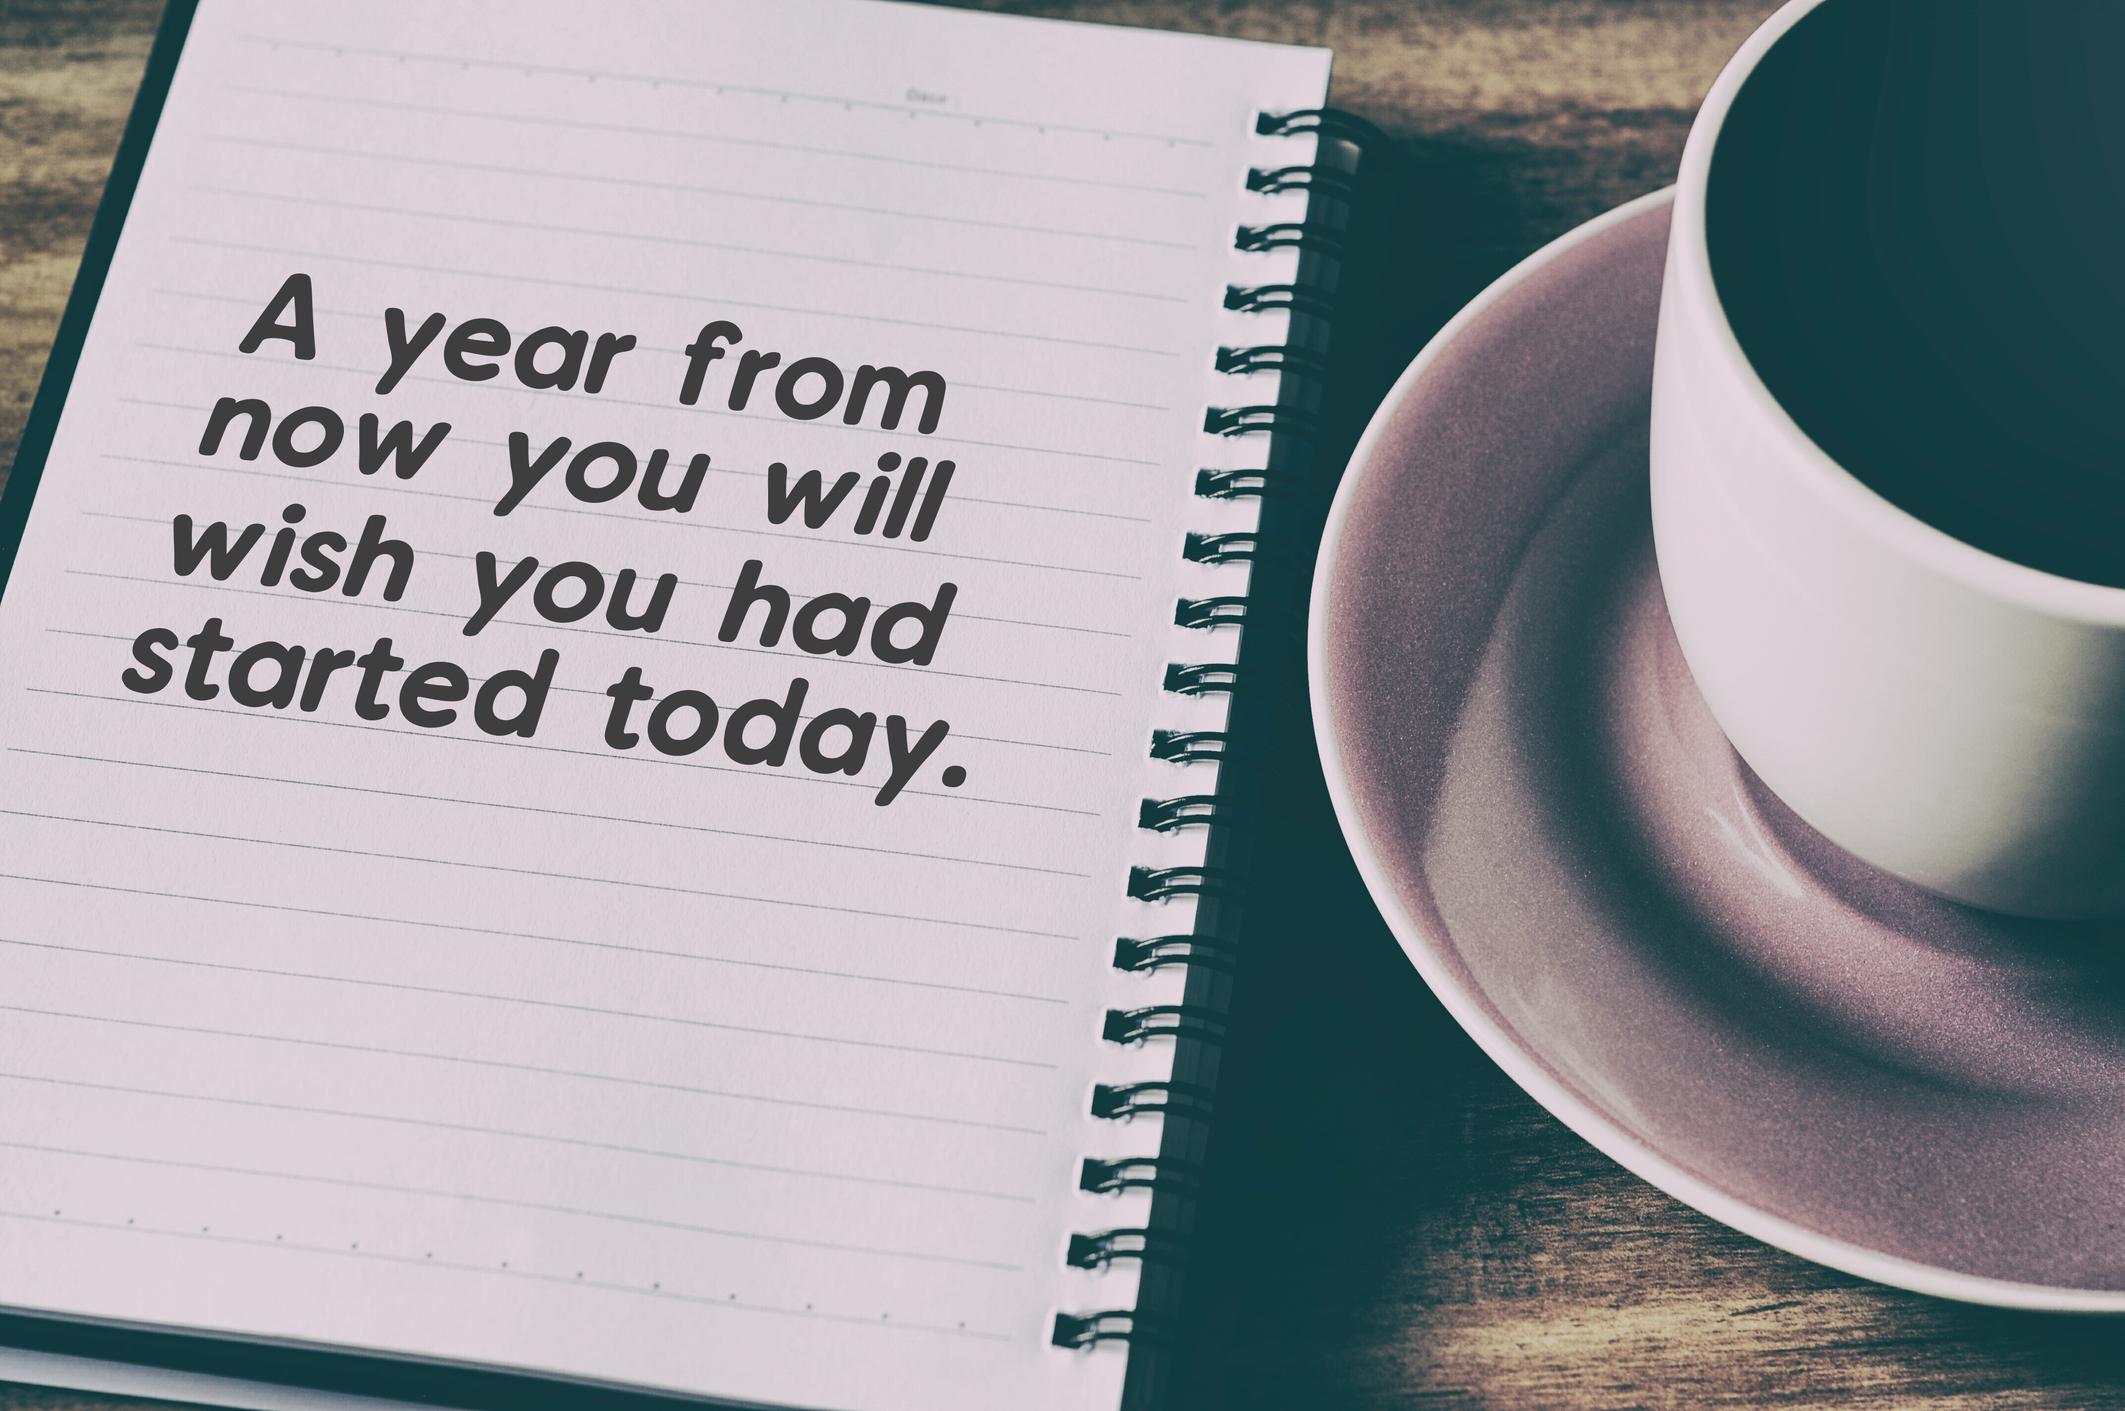 Inspirational and motivational quotes - One year from now you will wish yo had started today.